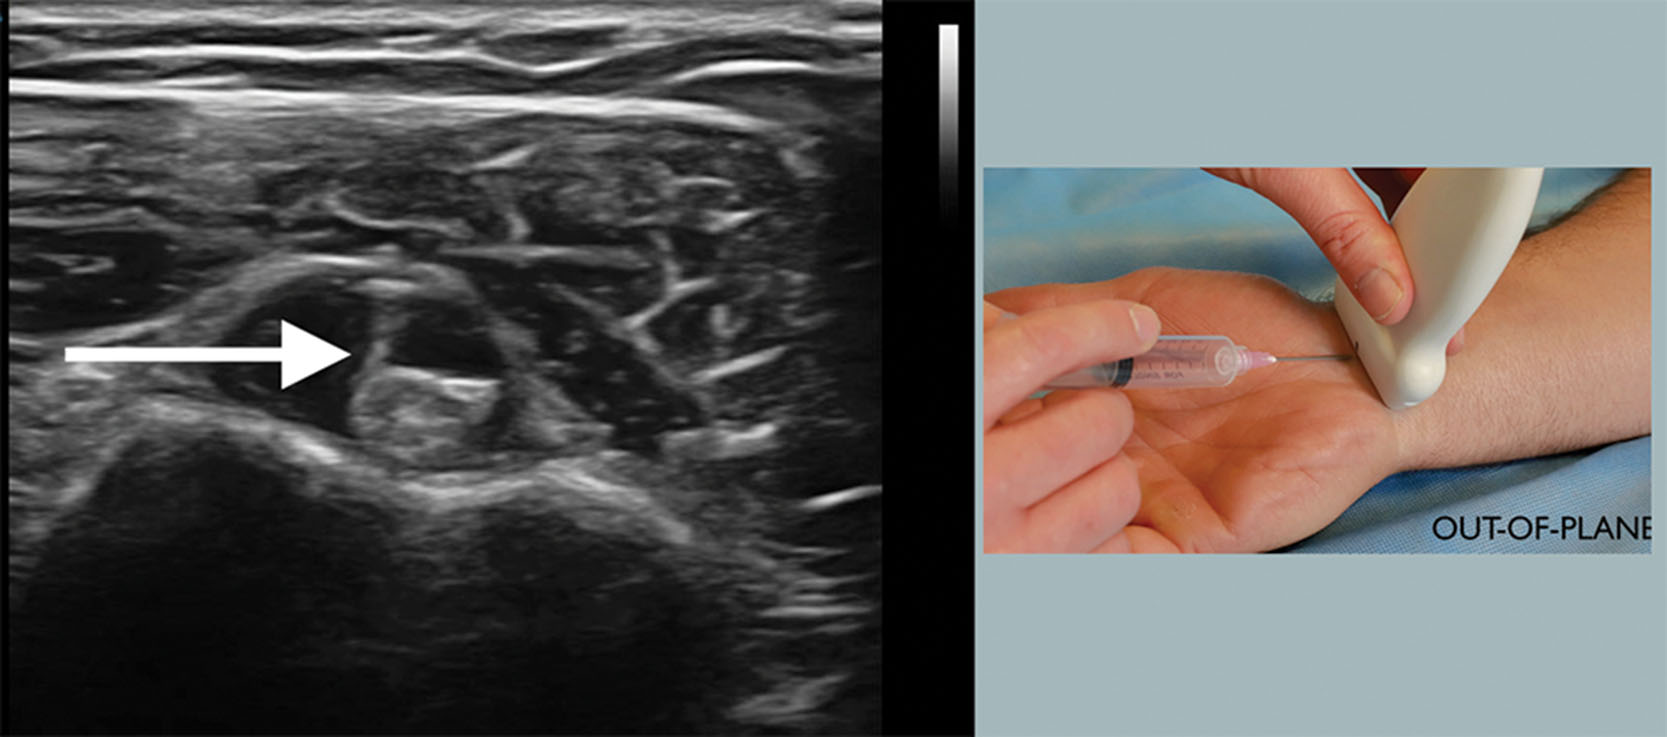 Fig. 18.18, A bicep sheath injection using an out-of-plane technique.